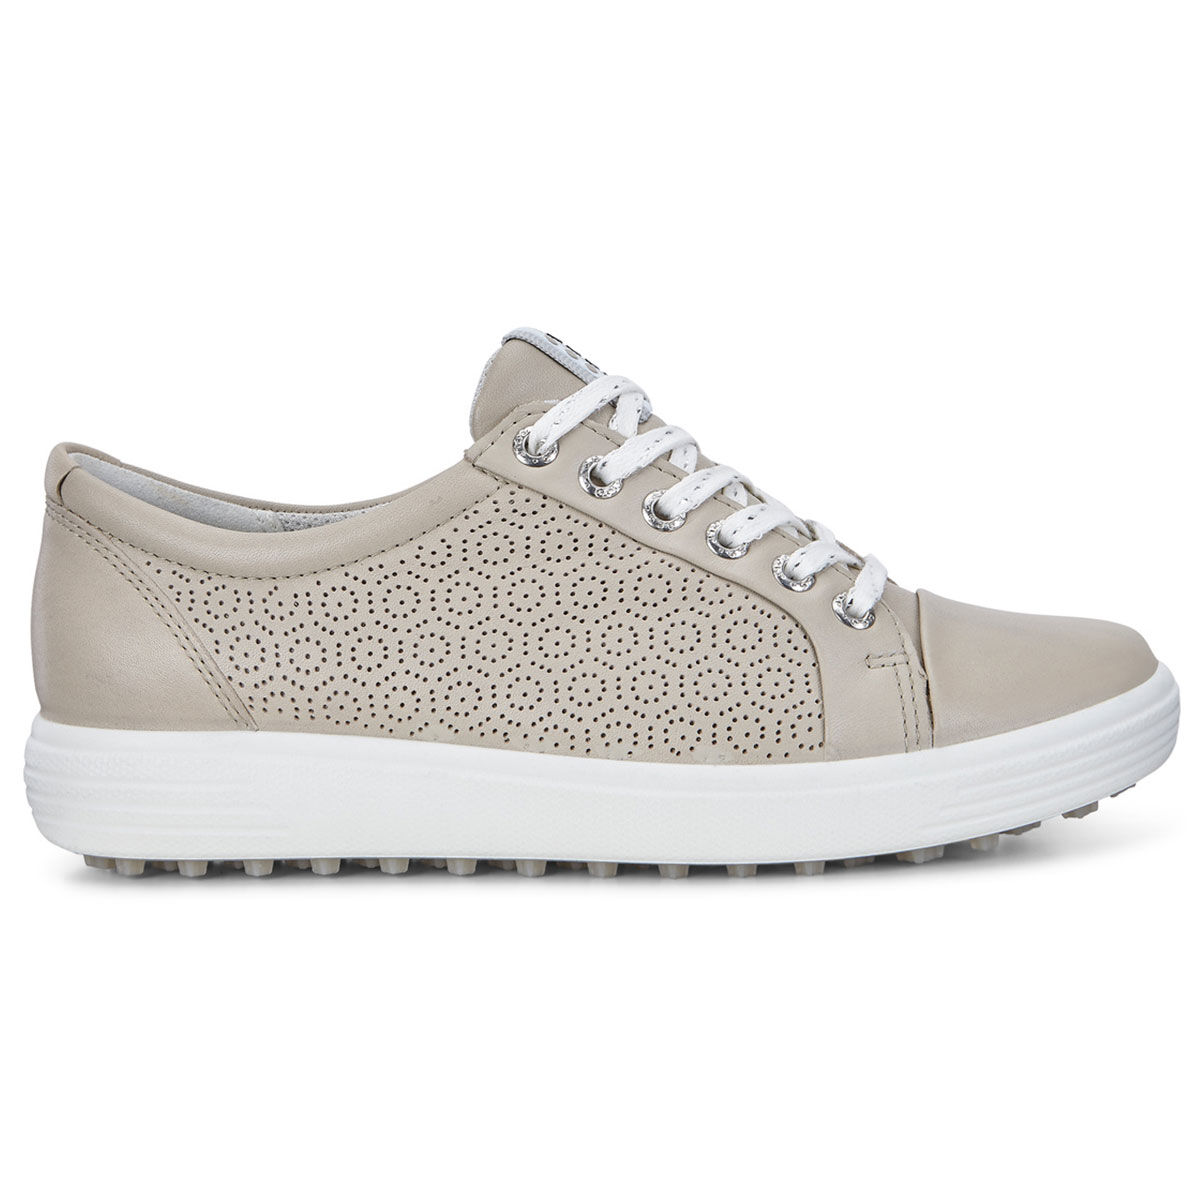 Chaussures ECCO Golf Casual Hybrid pour femmes, femme, 2, Oyster, Normal | Online Golf